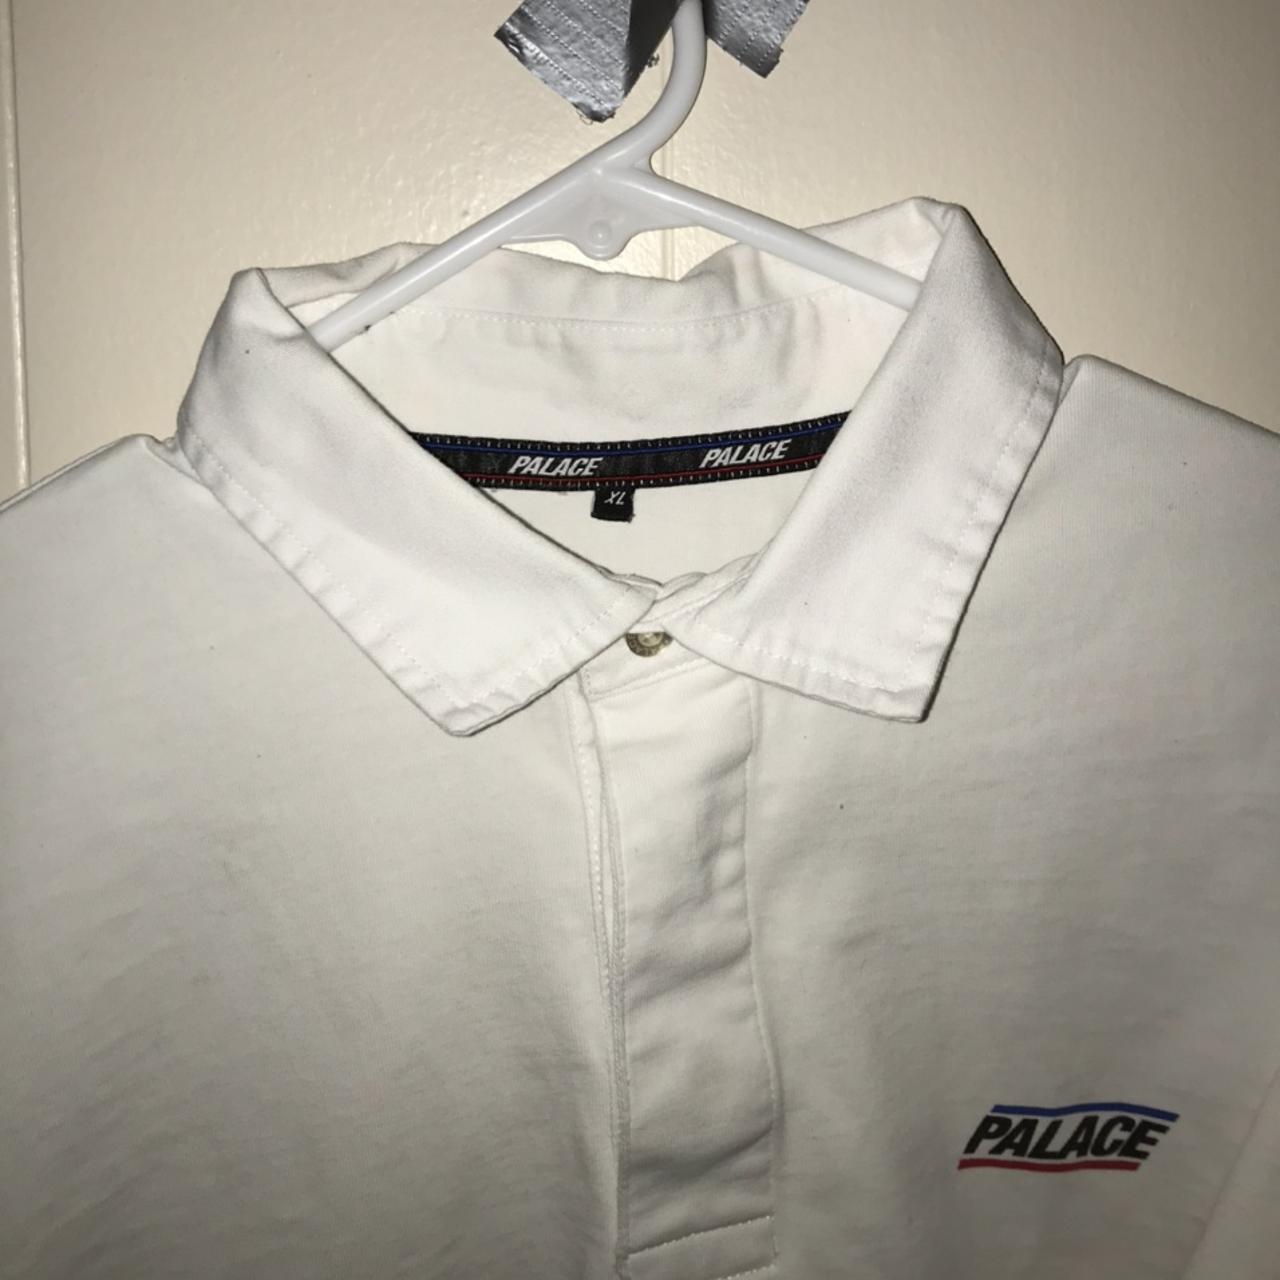 Palace basically a rugby shirt XL, #palace #rugby...